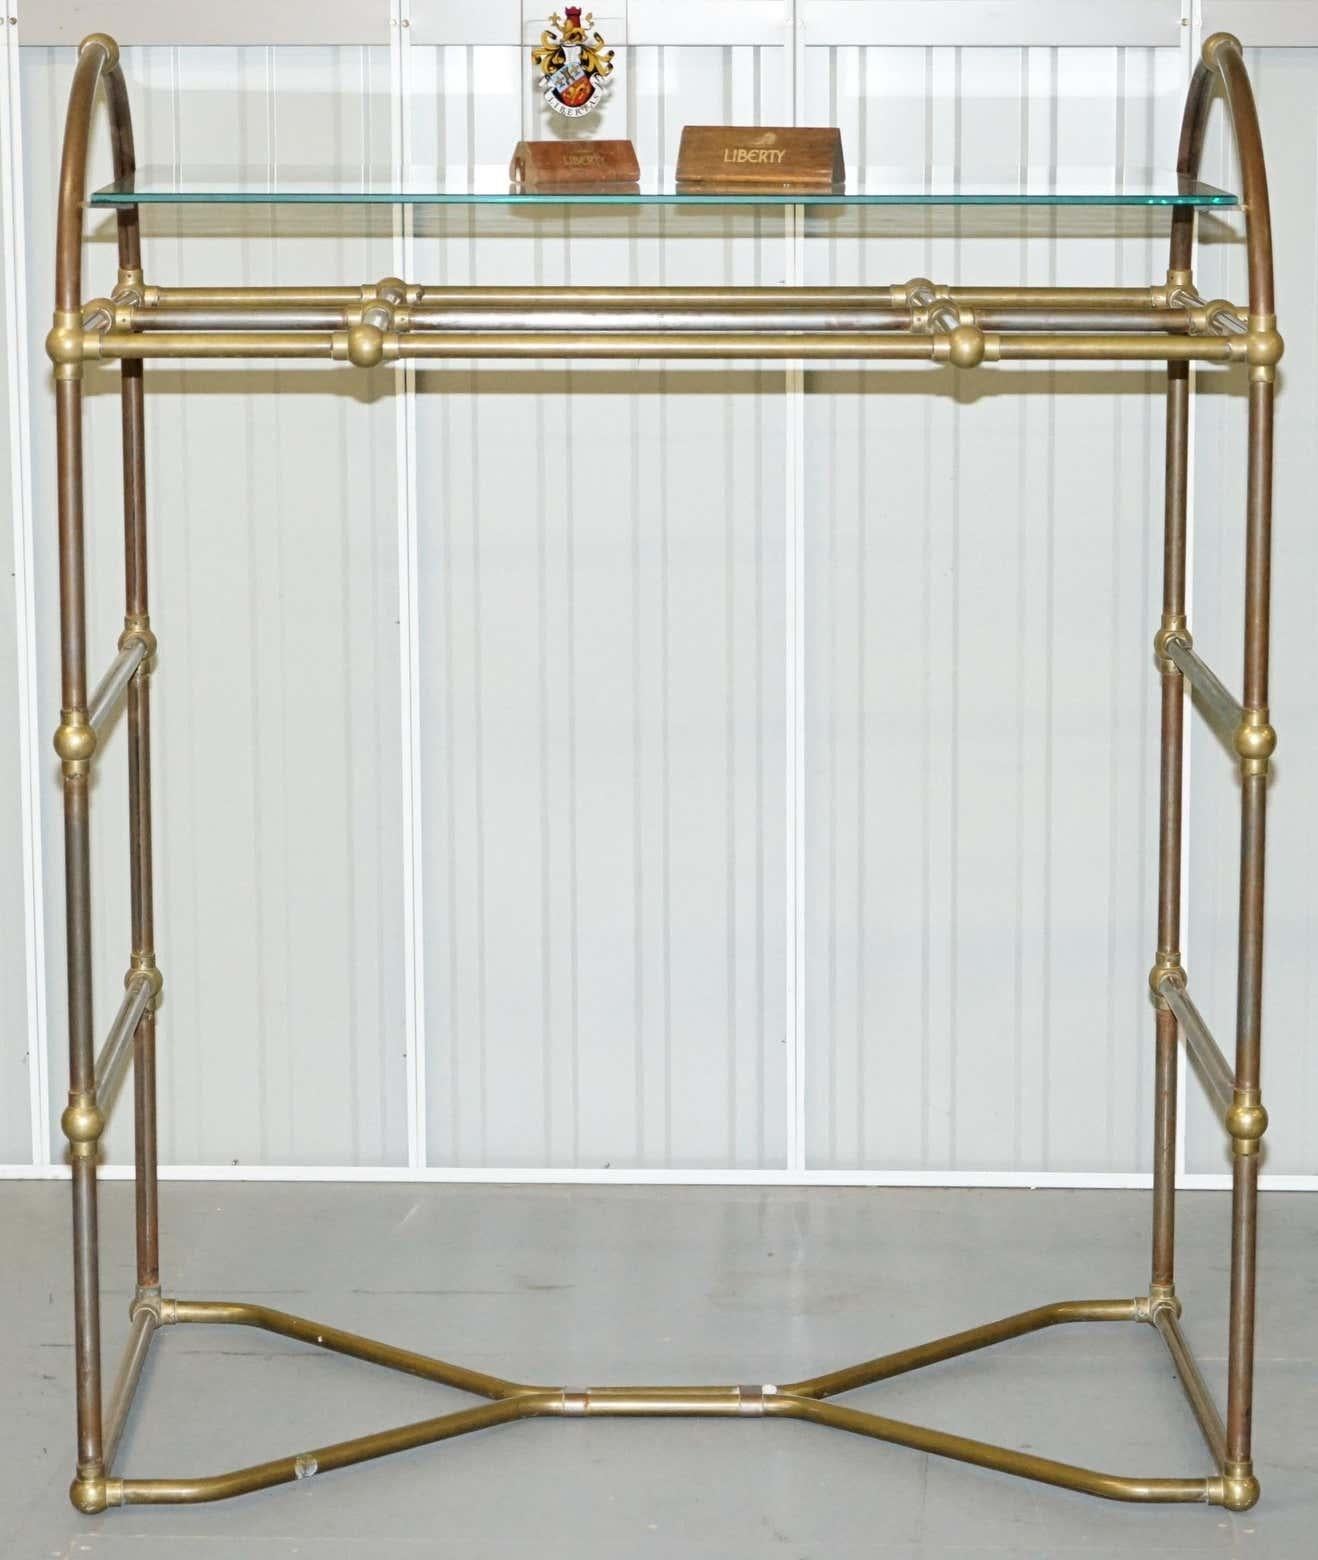 We are delighted to offer for sale this exceedingly rare original 1930’s Art Deco Bronze and Steel Liberty’s of London display rack with extending clothes rails which are part of a larger suite

This suite is as rare as they come in the world of